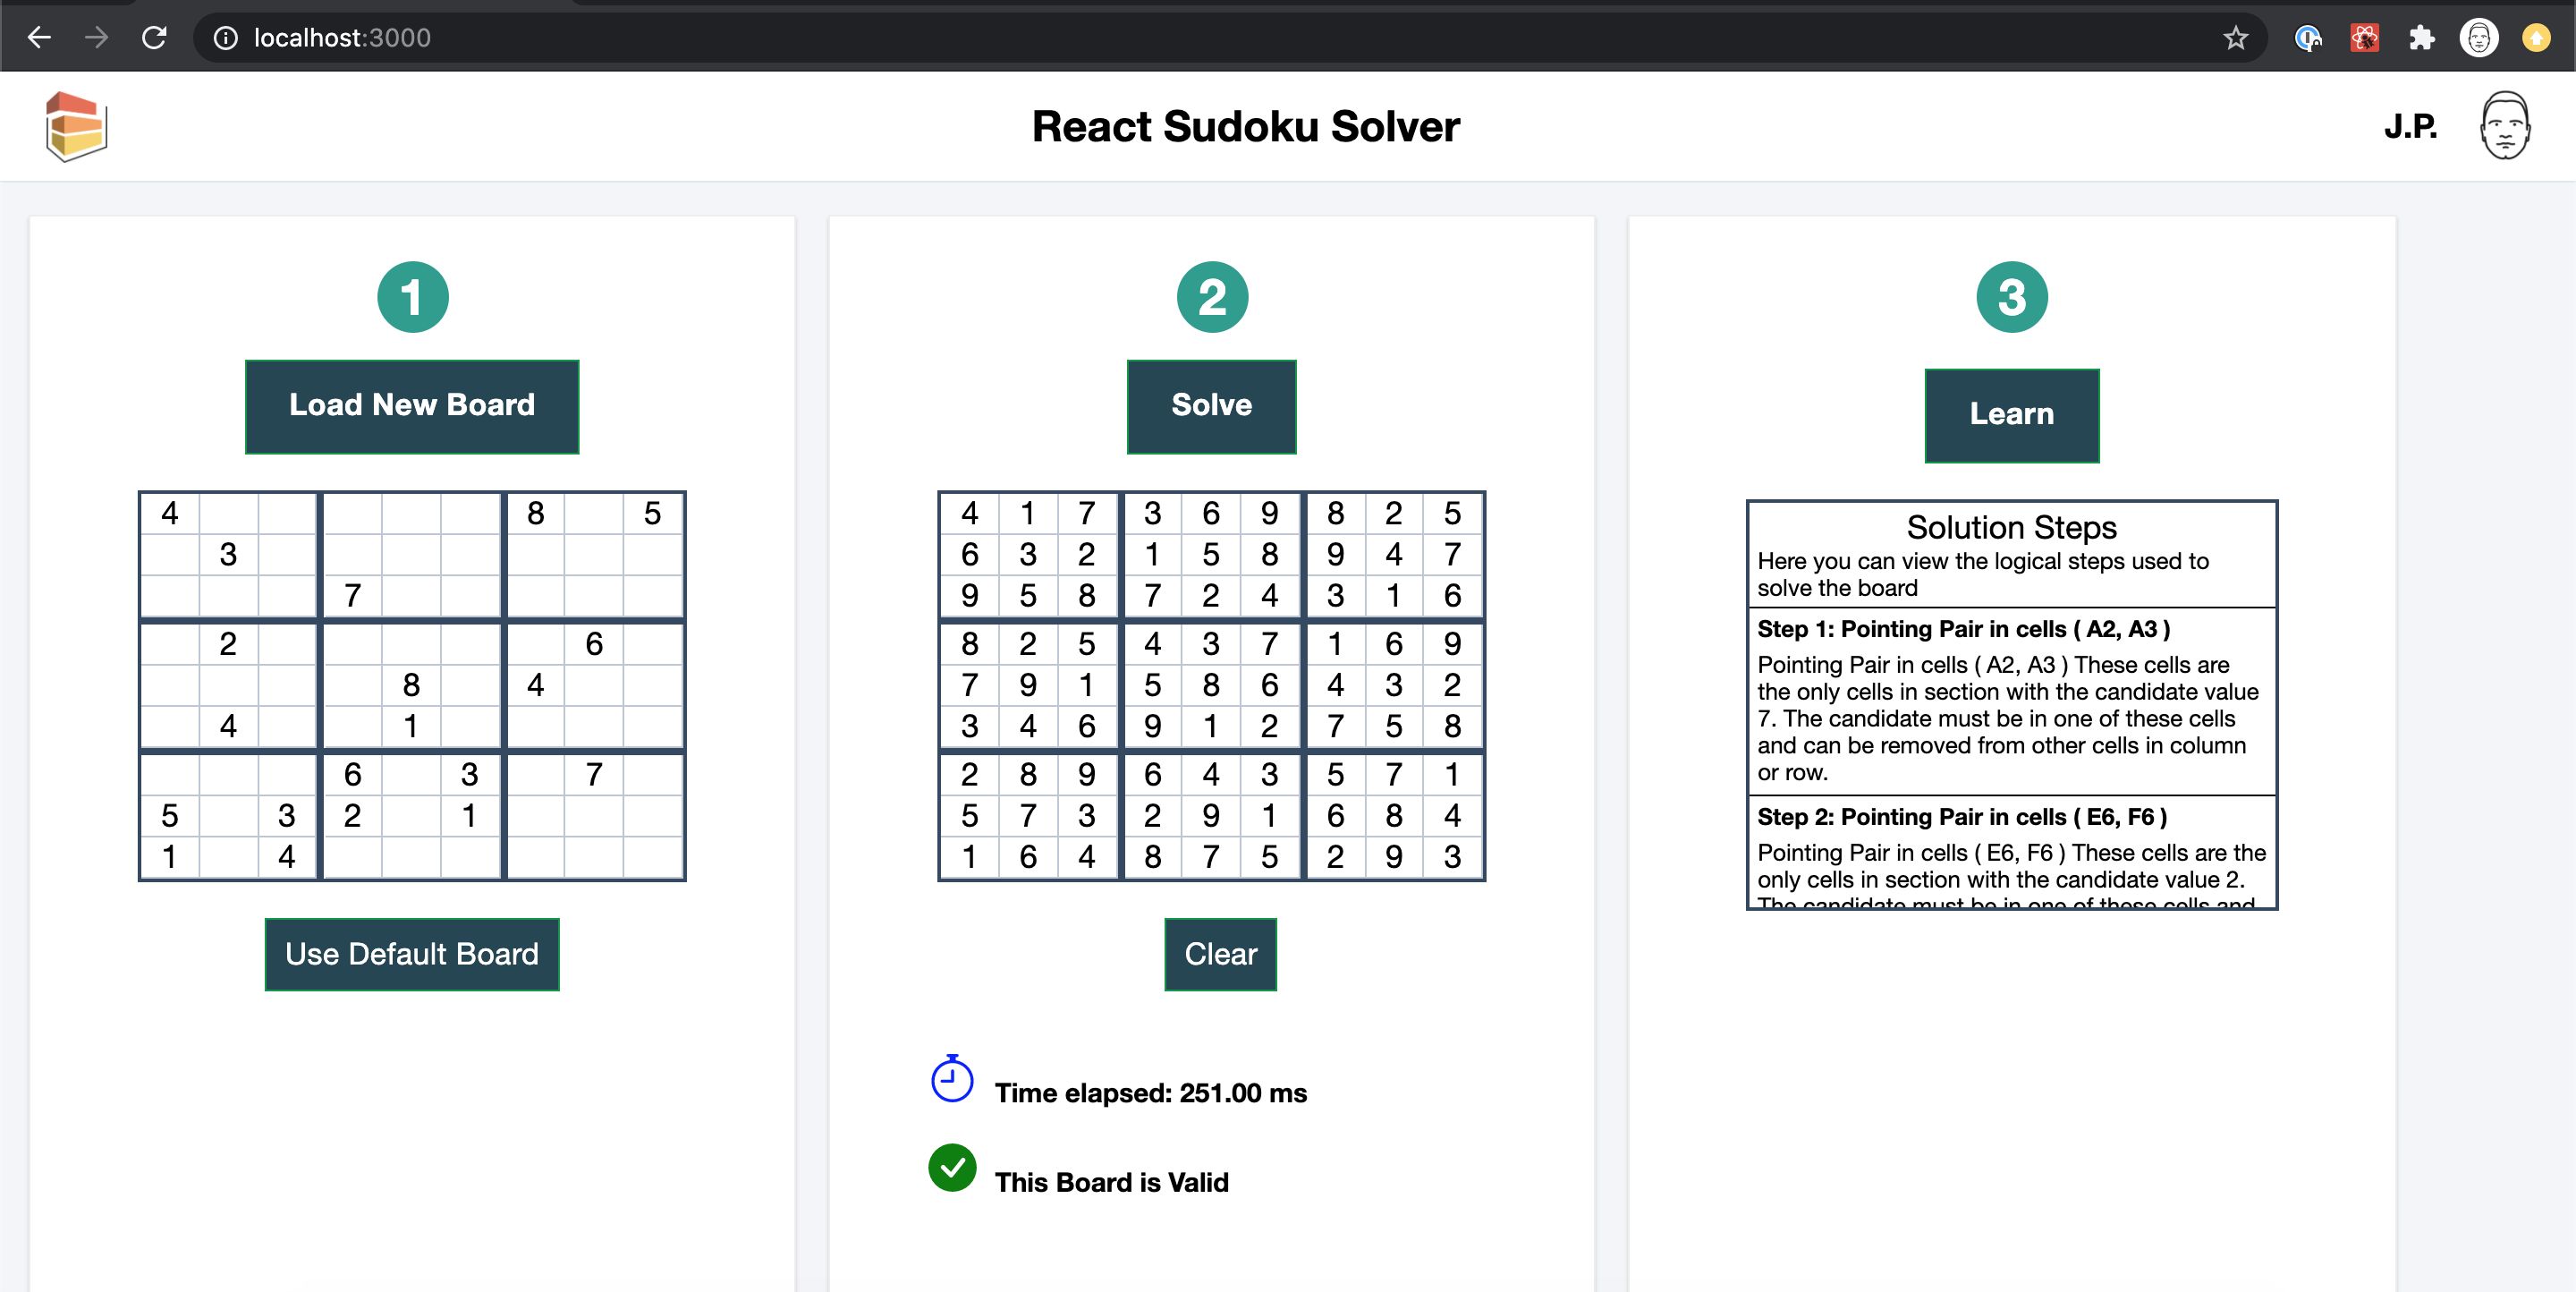 /creating-react-application-for-solving-every-sudoku-puzzle-26h316j feature image